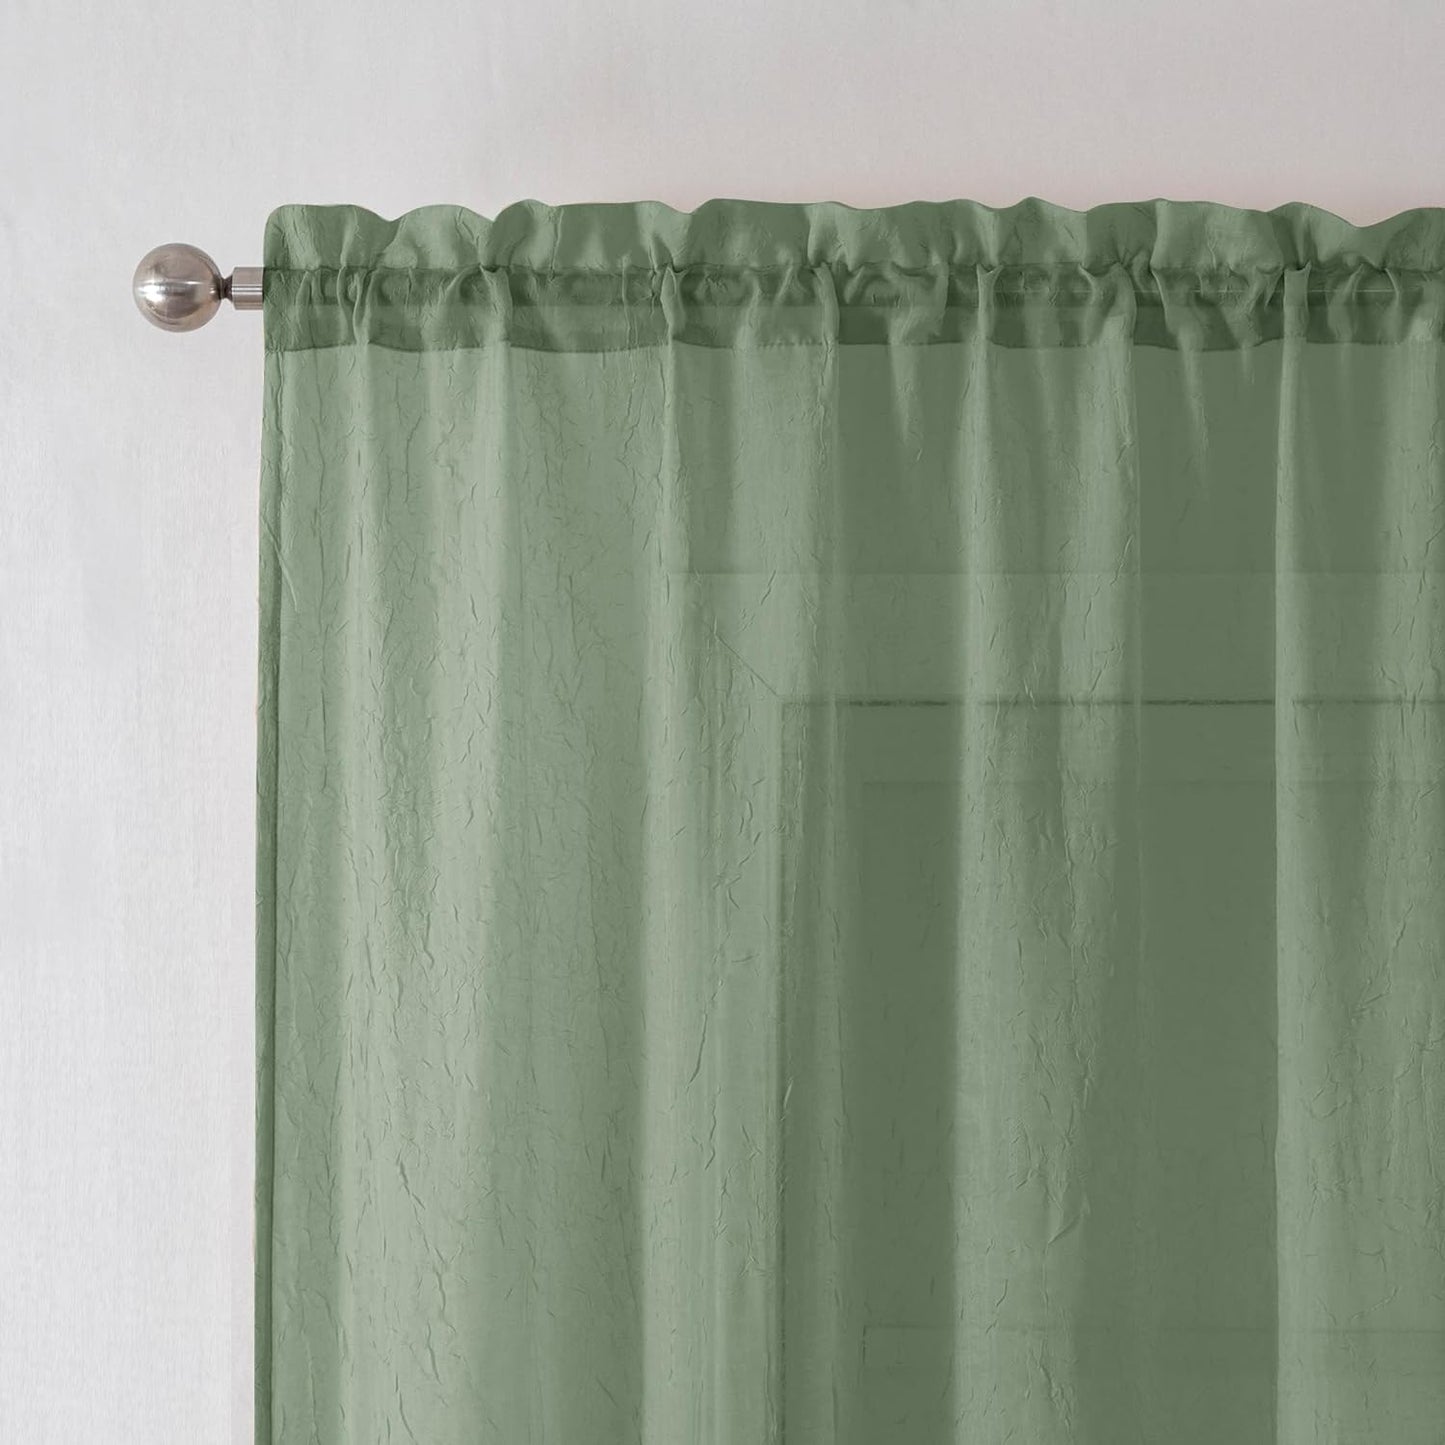 Chyhomenyc Crushed White Sheer Valances for Window 14 Inch Length 2 PCS, Crinkle Voile Short Kitchen Curtains with Dual Rod Pockets，Gauzy Bedroom Curtain Valance，Each 42Wx14L Inches  Chyhomenyc Sage Green 42 W X 36 L 